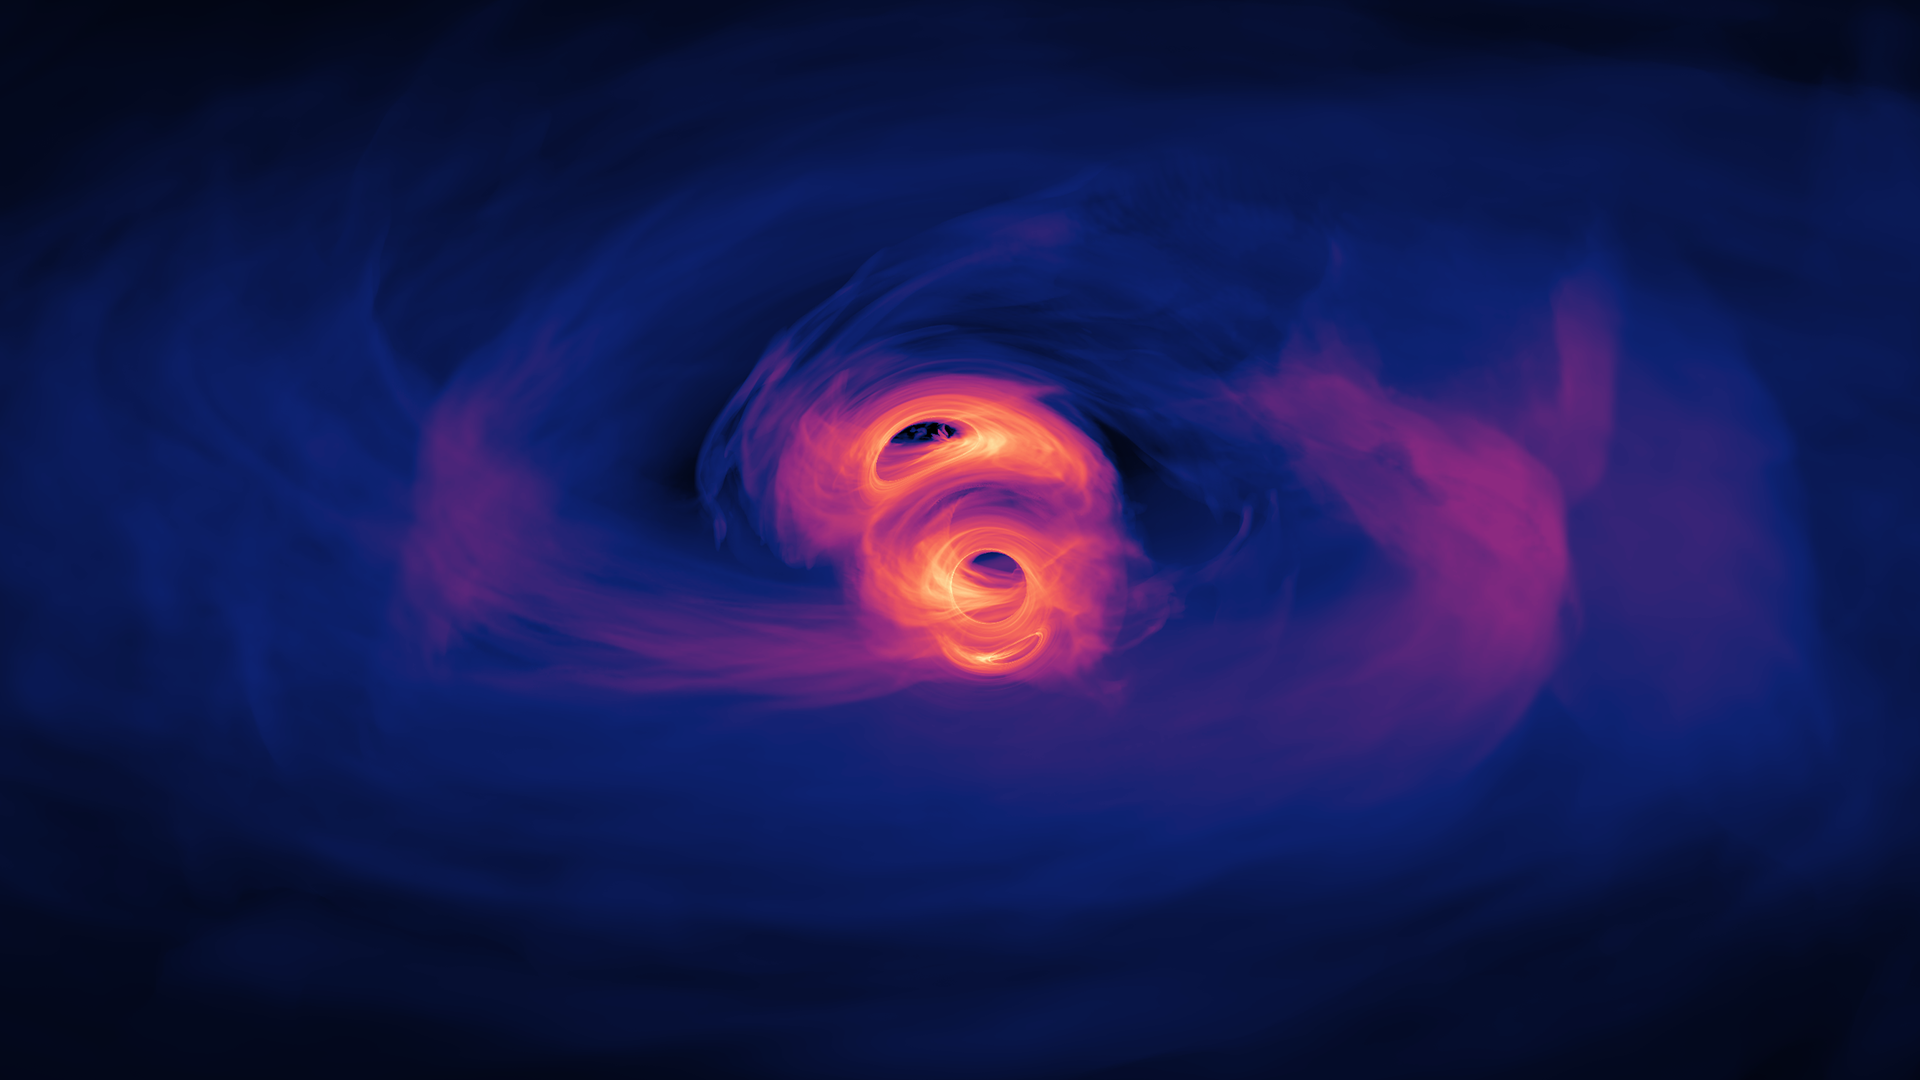 Supermassive Black Hole Binary Simulation These two black holes are just 40 orbits away from merging in this simulation of the light their environment emits as they dance. Download the desktop version here.Download the smartphone version here.Credit: Credit: NASA's Goddard Space Flight Center/Scott Noble; simulation data, d'Ascoli et al. 2018